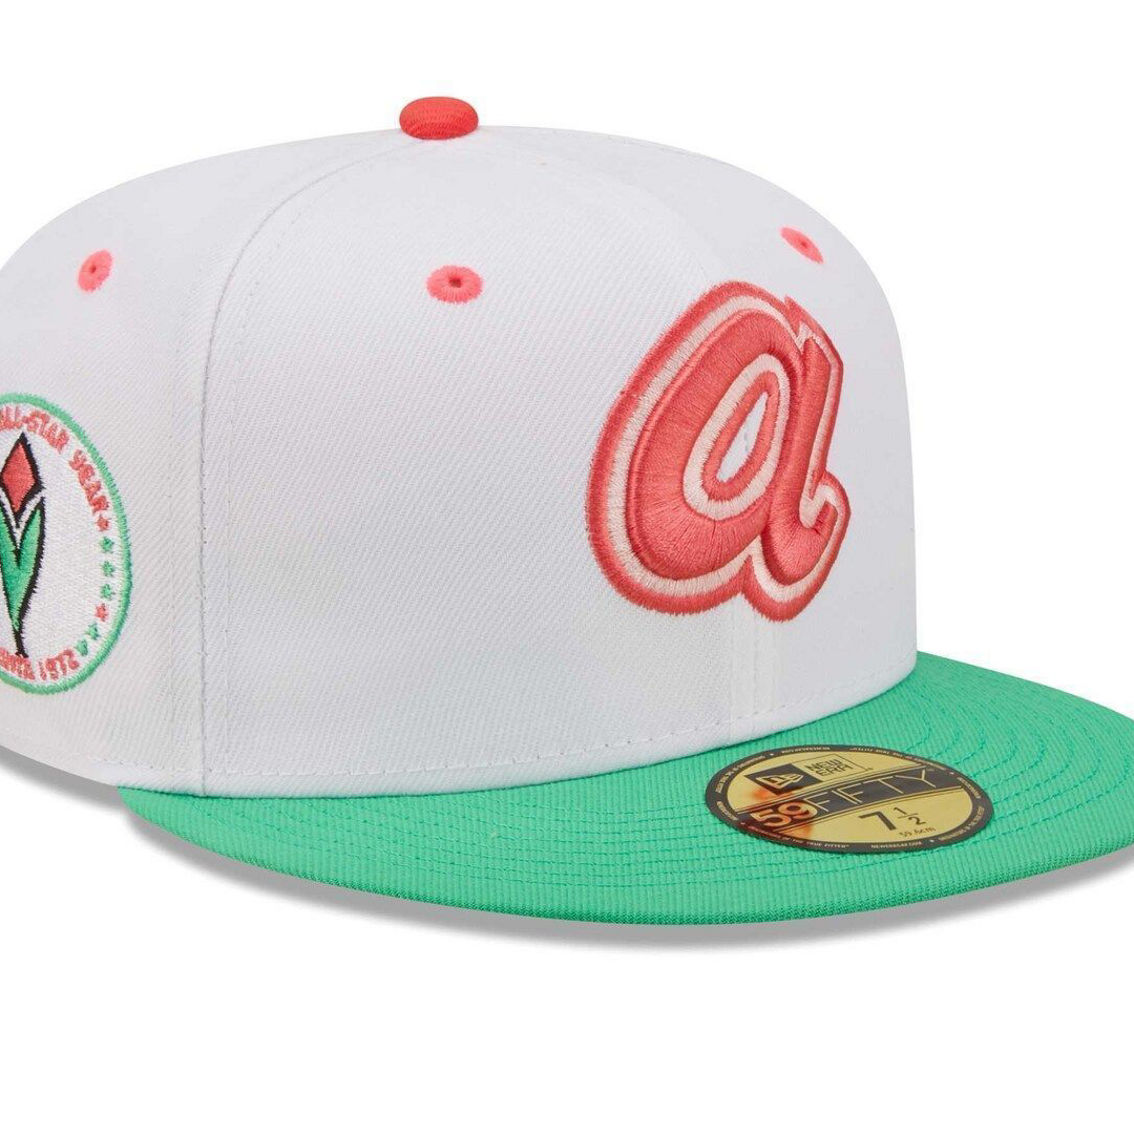 New Era Men's White/Green Atlanta Braves 1972 MLB All-Star Game Watermelon Lolli 59FIFTY Fitted Hat - Image 2 of 4